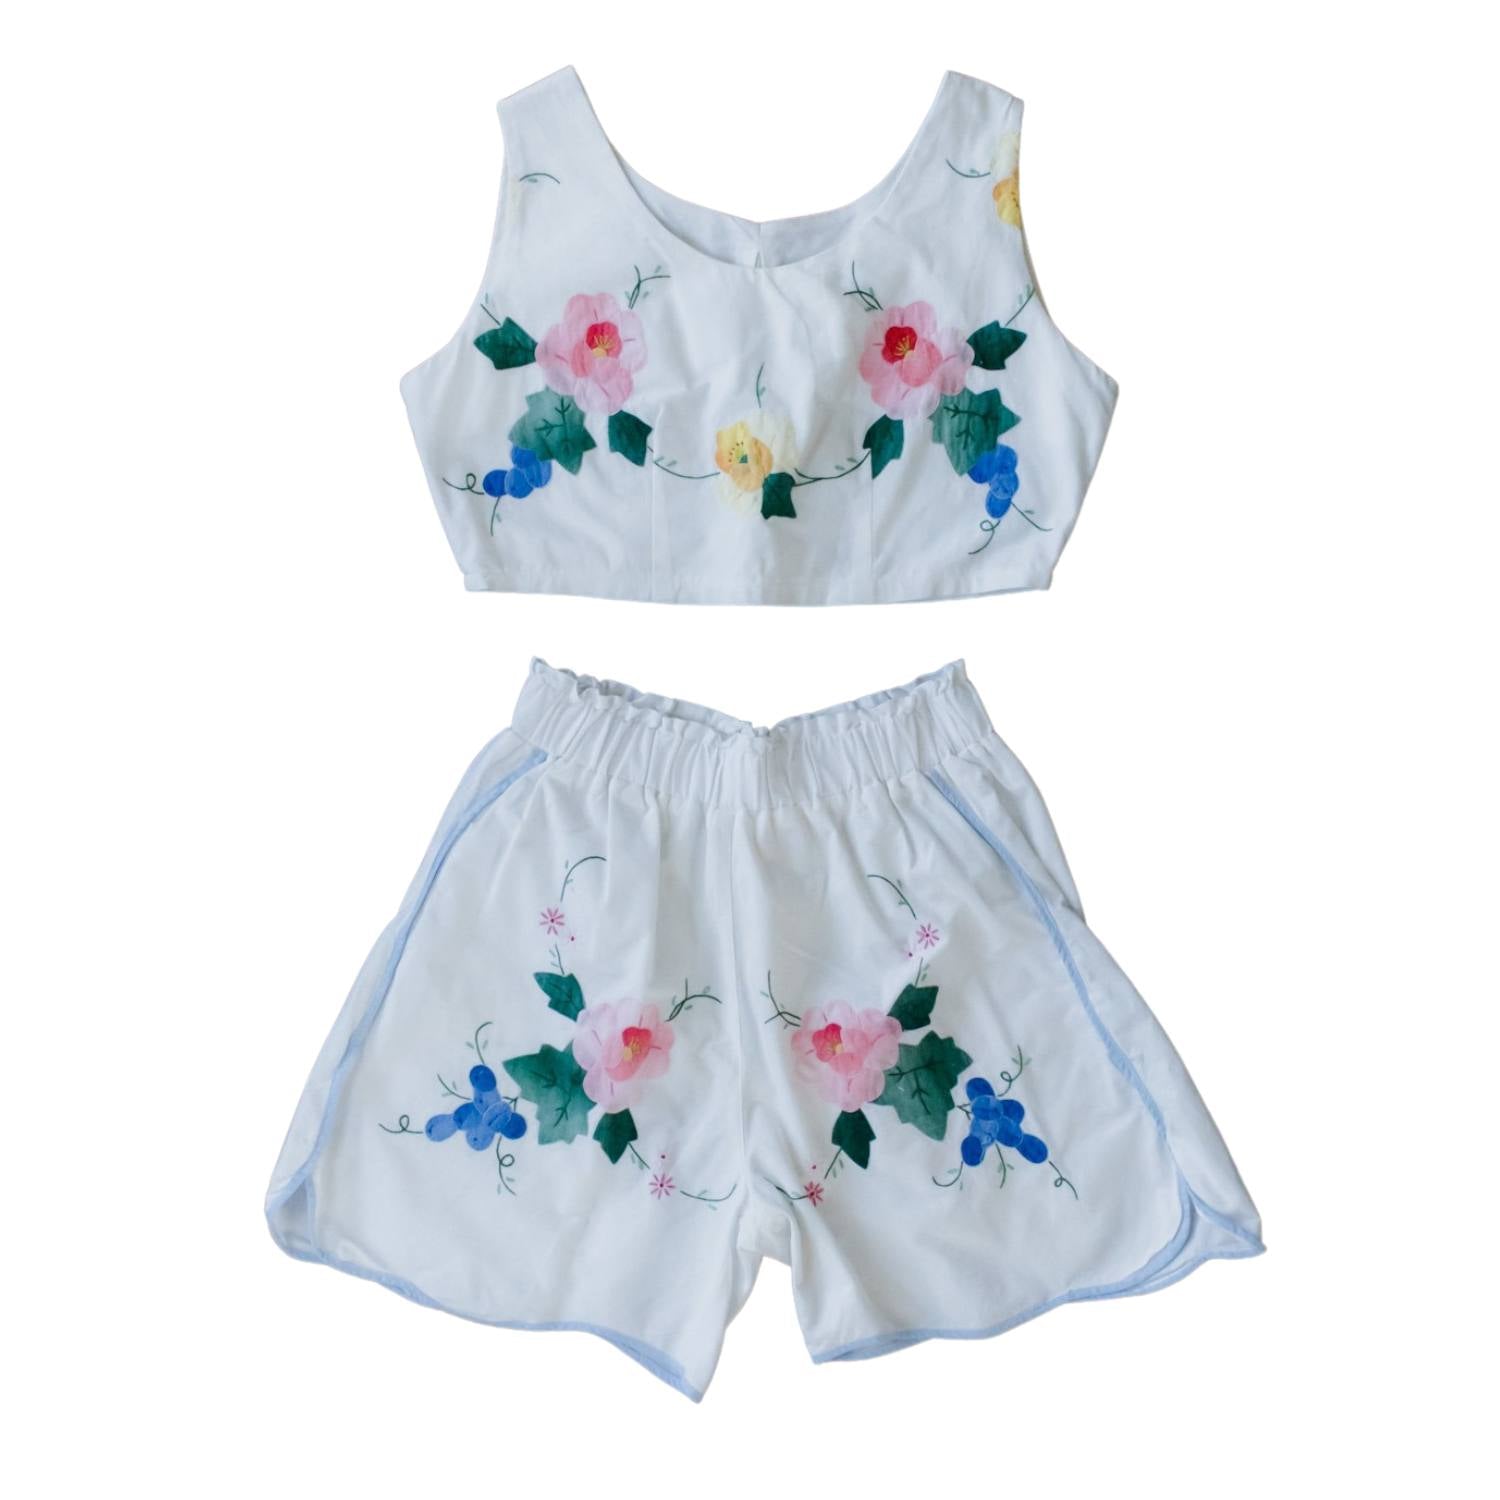 Women’s Upcycled Hand-Embroidered Floral Crop Top & Shorts Set With Blue Border Medium Sugar Cream Vintage